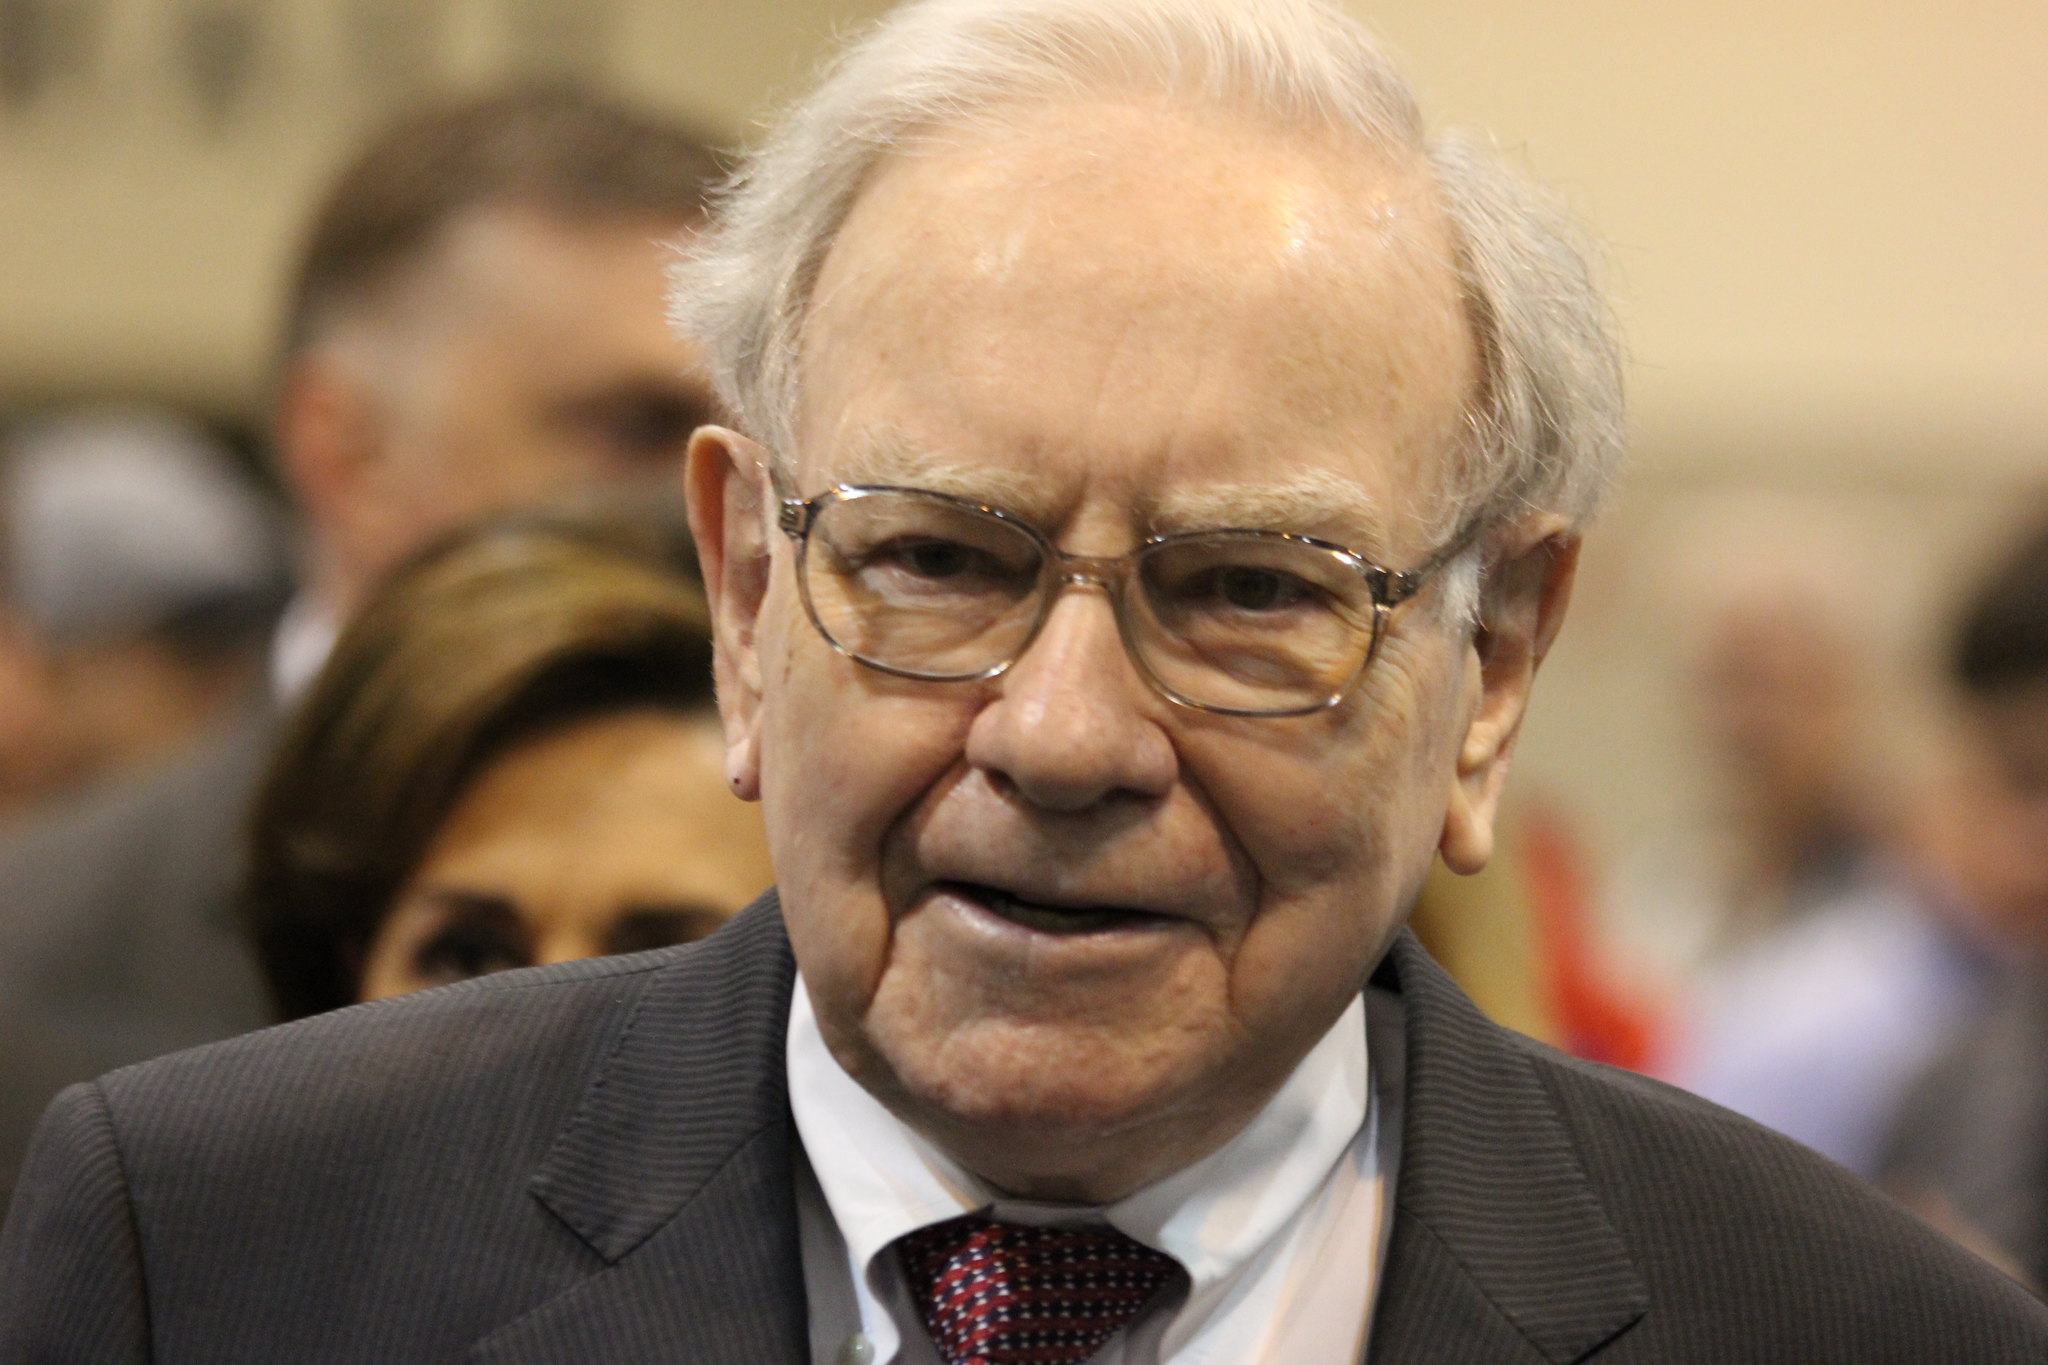 How Much Money Does Warren Buffett Have Invested in Apple?